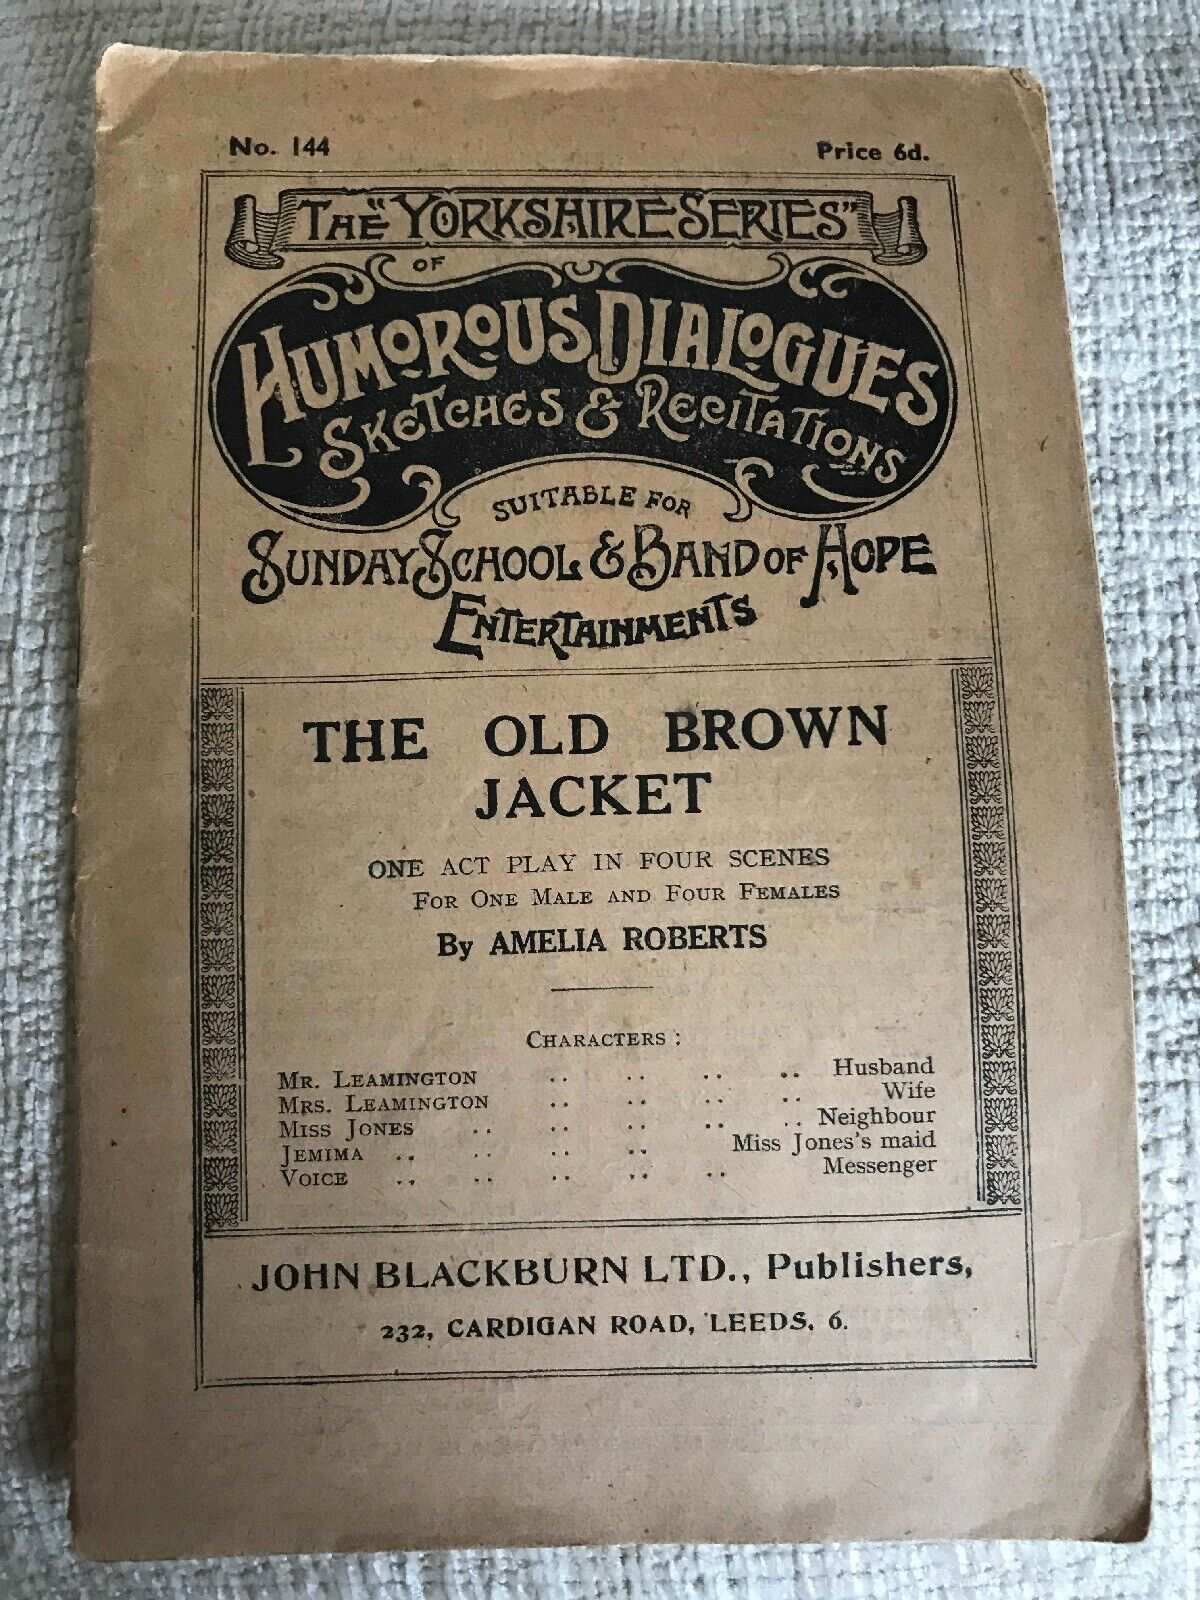 1920’s The Old Brown Jacket - Amelia Roberts Humerous Dialogues Sketches & Recit Honeyburn Books (UK)